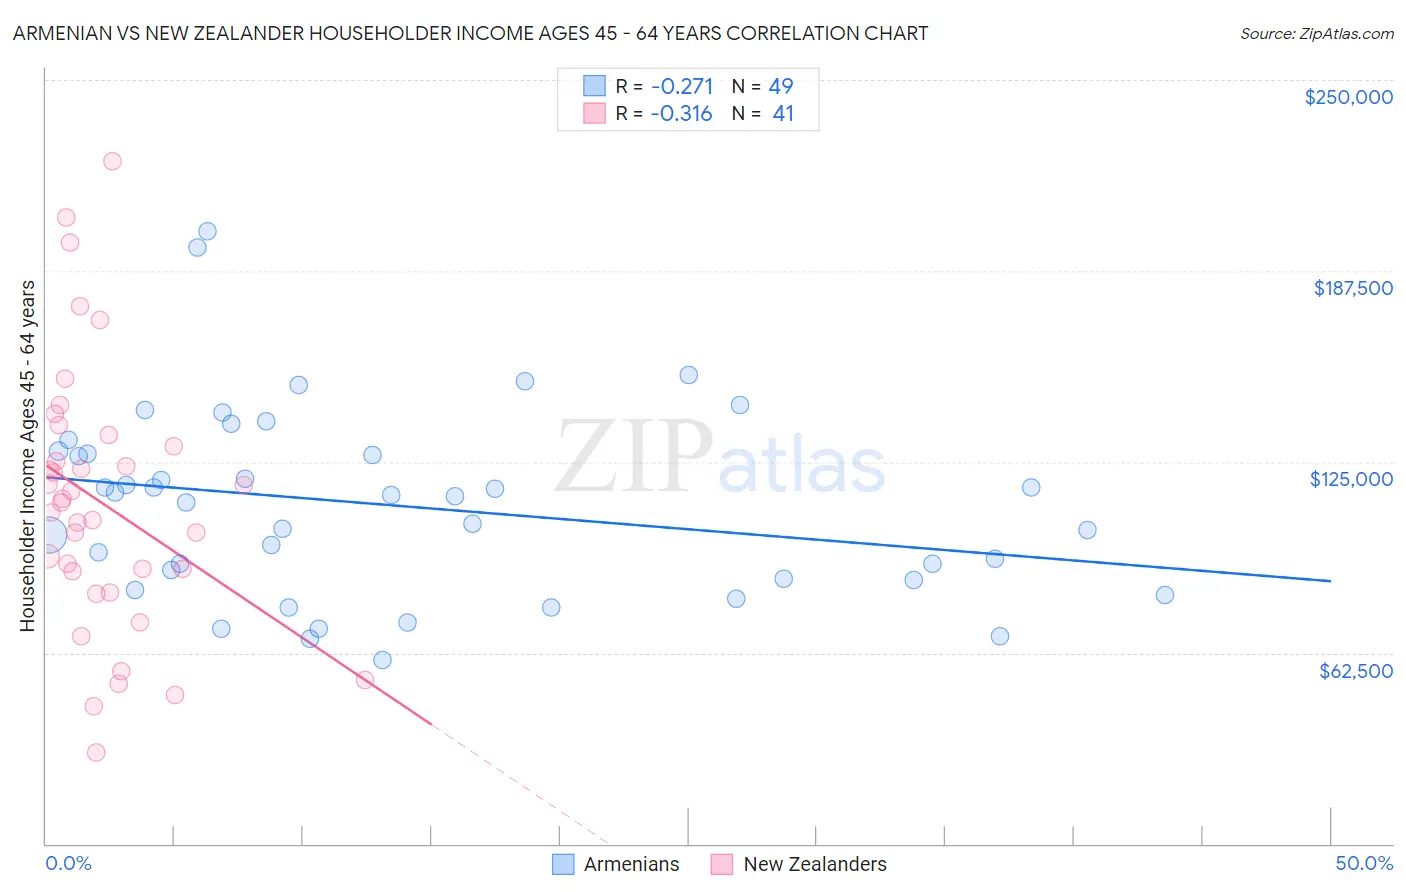 Armenian vs New Zealander Householder Income Ages 45 - 64 years